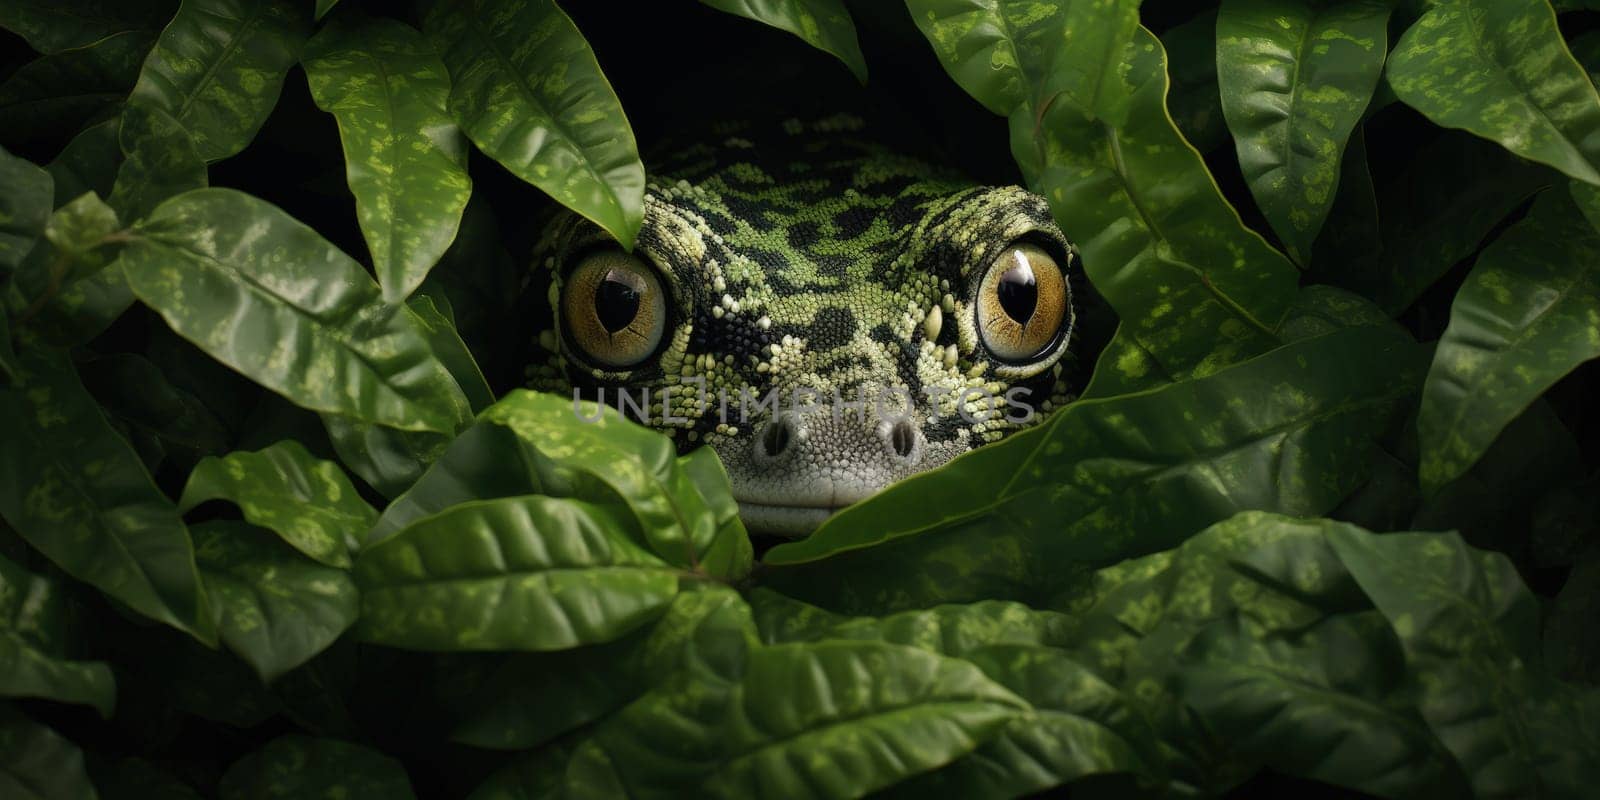 An intimate portrayal of gecko in a front view, expertly camouflaged among the greenery of leaves by Kadula